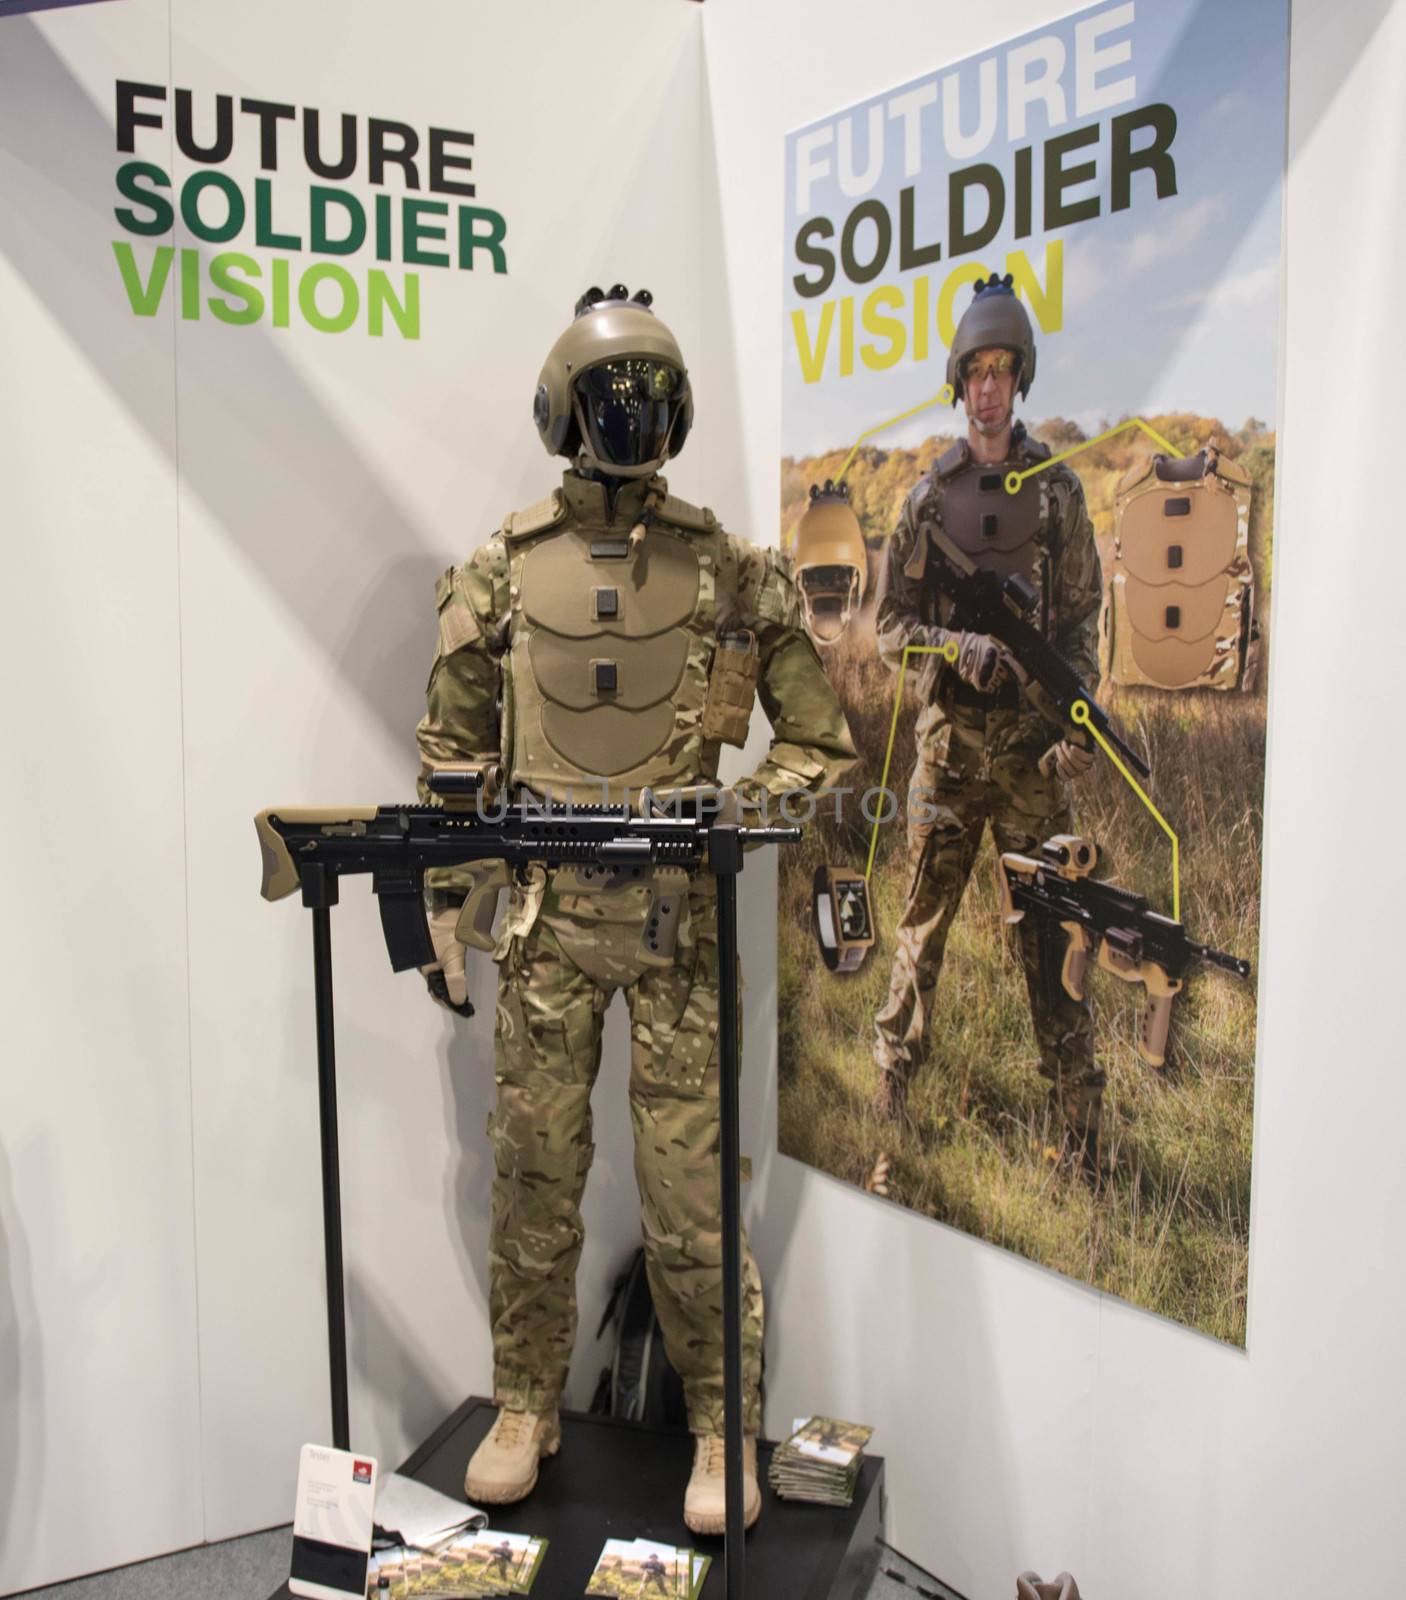 UNITED KINGDOM, London: Future soldier	The Defence and Security International Exhibition (DSEI) began in London on September 15, 2015 despite a week of direct action protests by peace campaigners.  	The arms fair has seen over 30,000 people descend on London to see the 1,500 exhibitors who are displaying weapons of war from pistols and rifles up to tanks, assault helicopters and warships.  	Protesters attempted to block the main road into the exhibition, claiming that such an event strengthened the UK's ties to human rights abuses. 